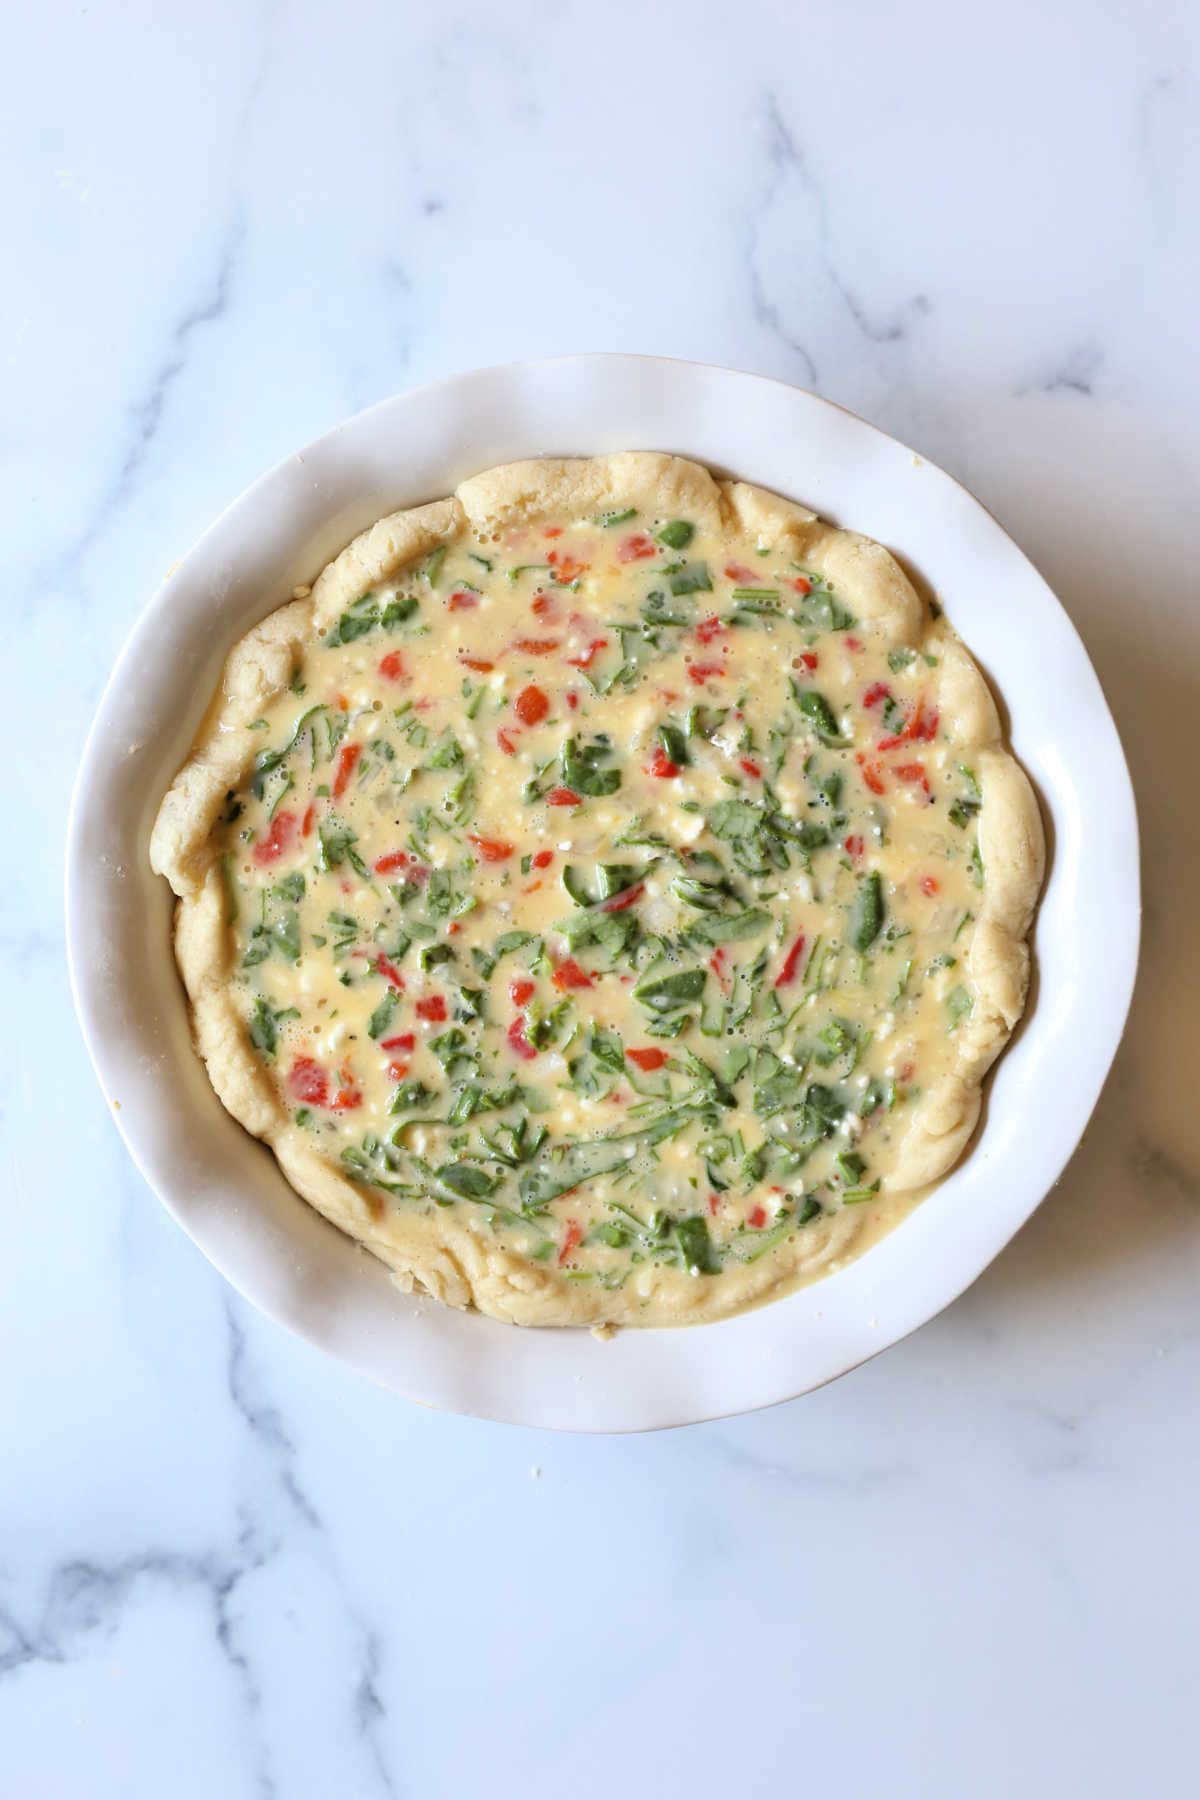 gluten free pie crust filled with spinach quiche filling